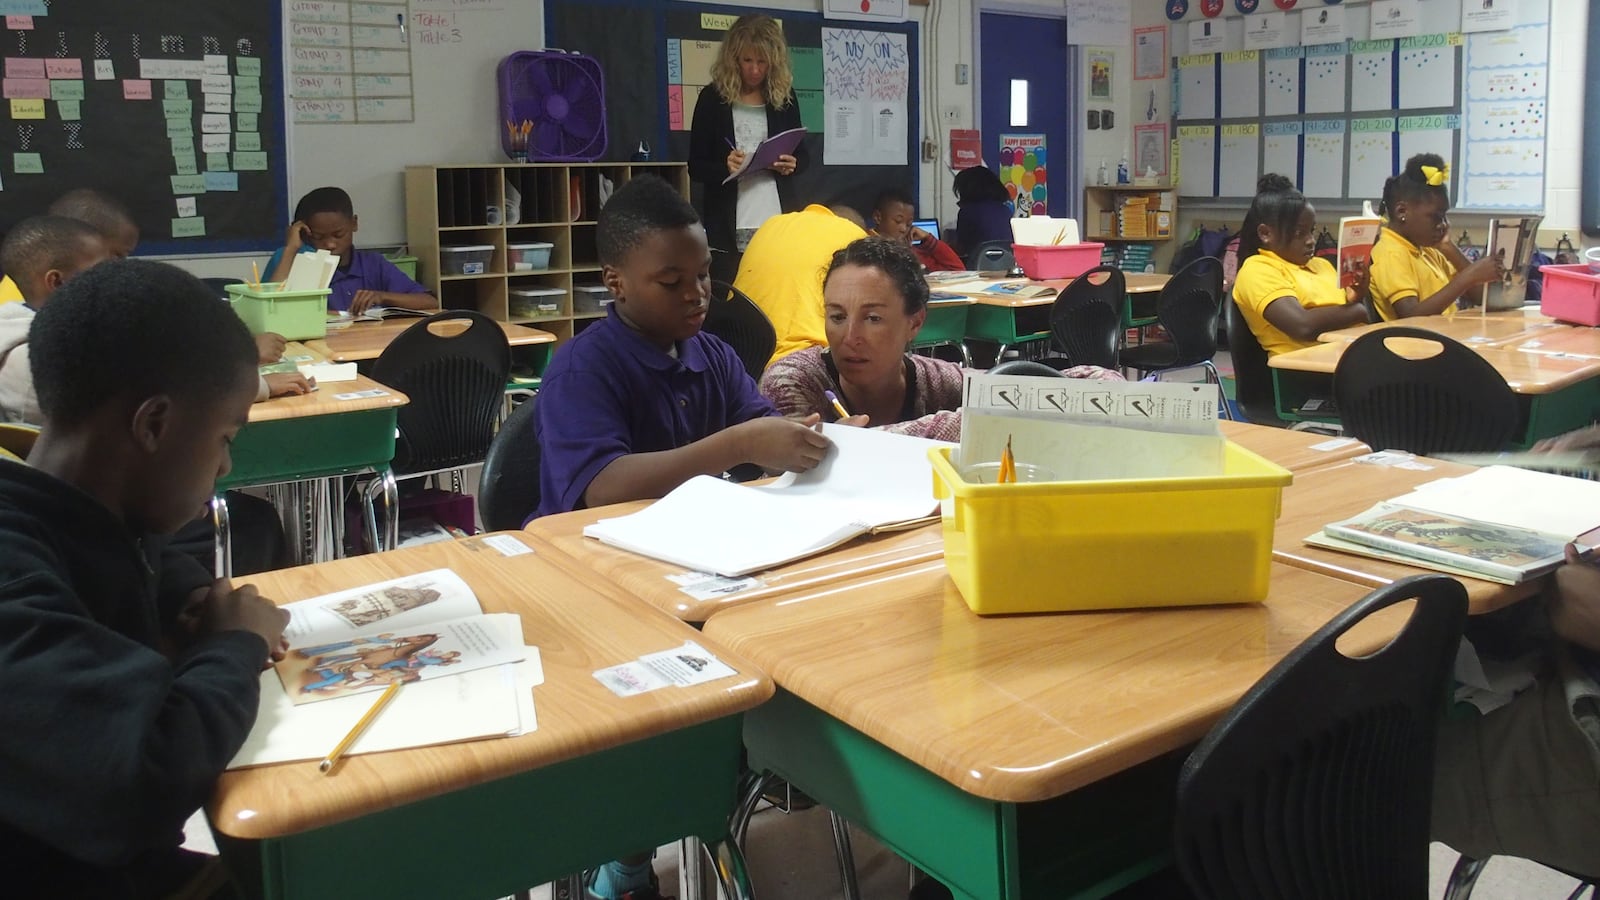 Aspire CEO Carolyn Hack talks with a student at Hanley 1 Elementary School during her tour of Aspire-operated charter schools in Memphis.